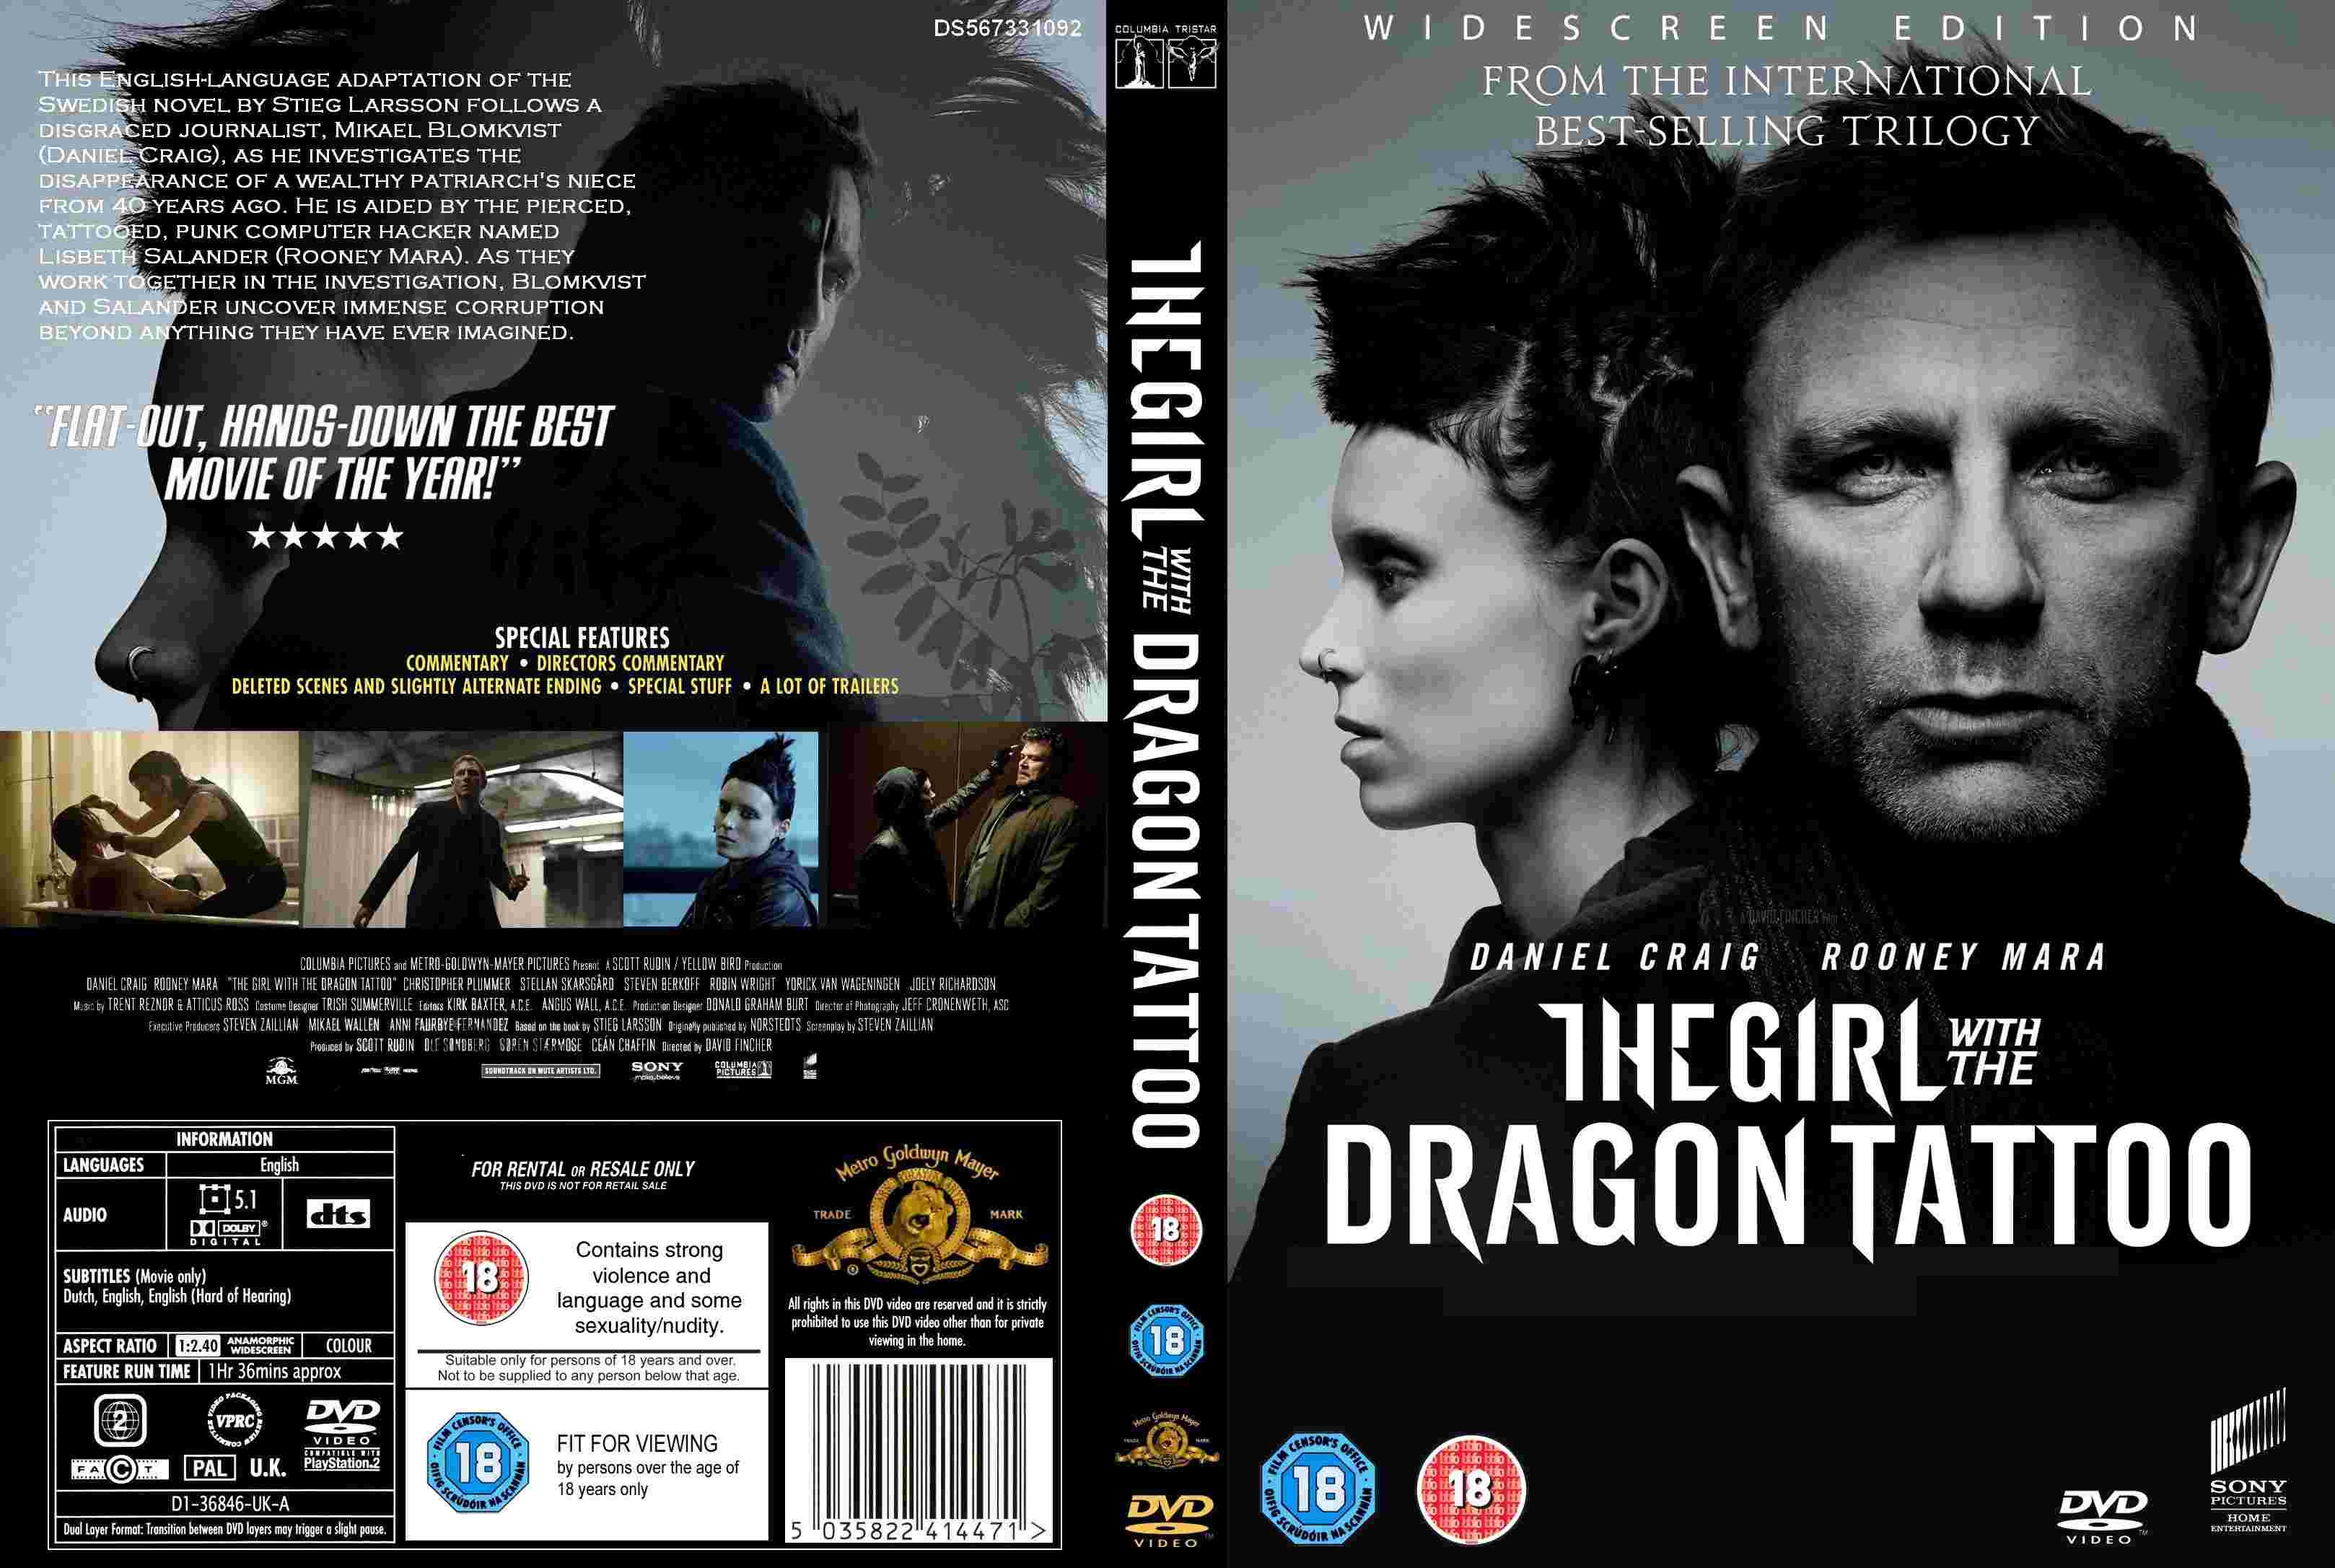 The girl with the Dragon Tattoo DVD